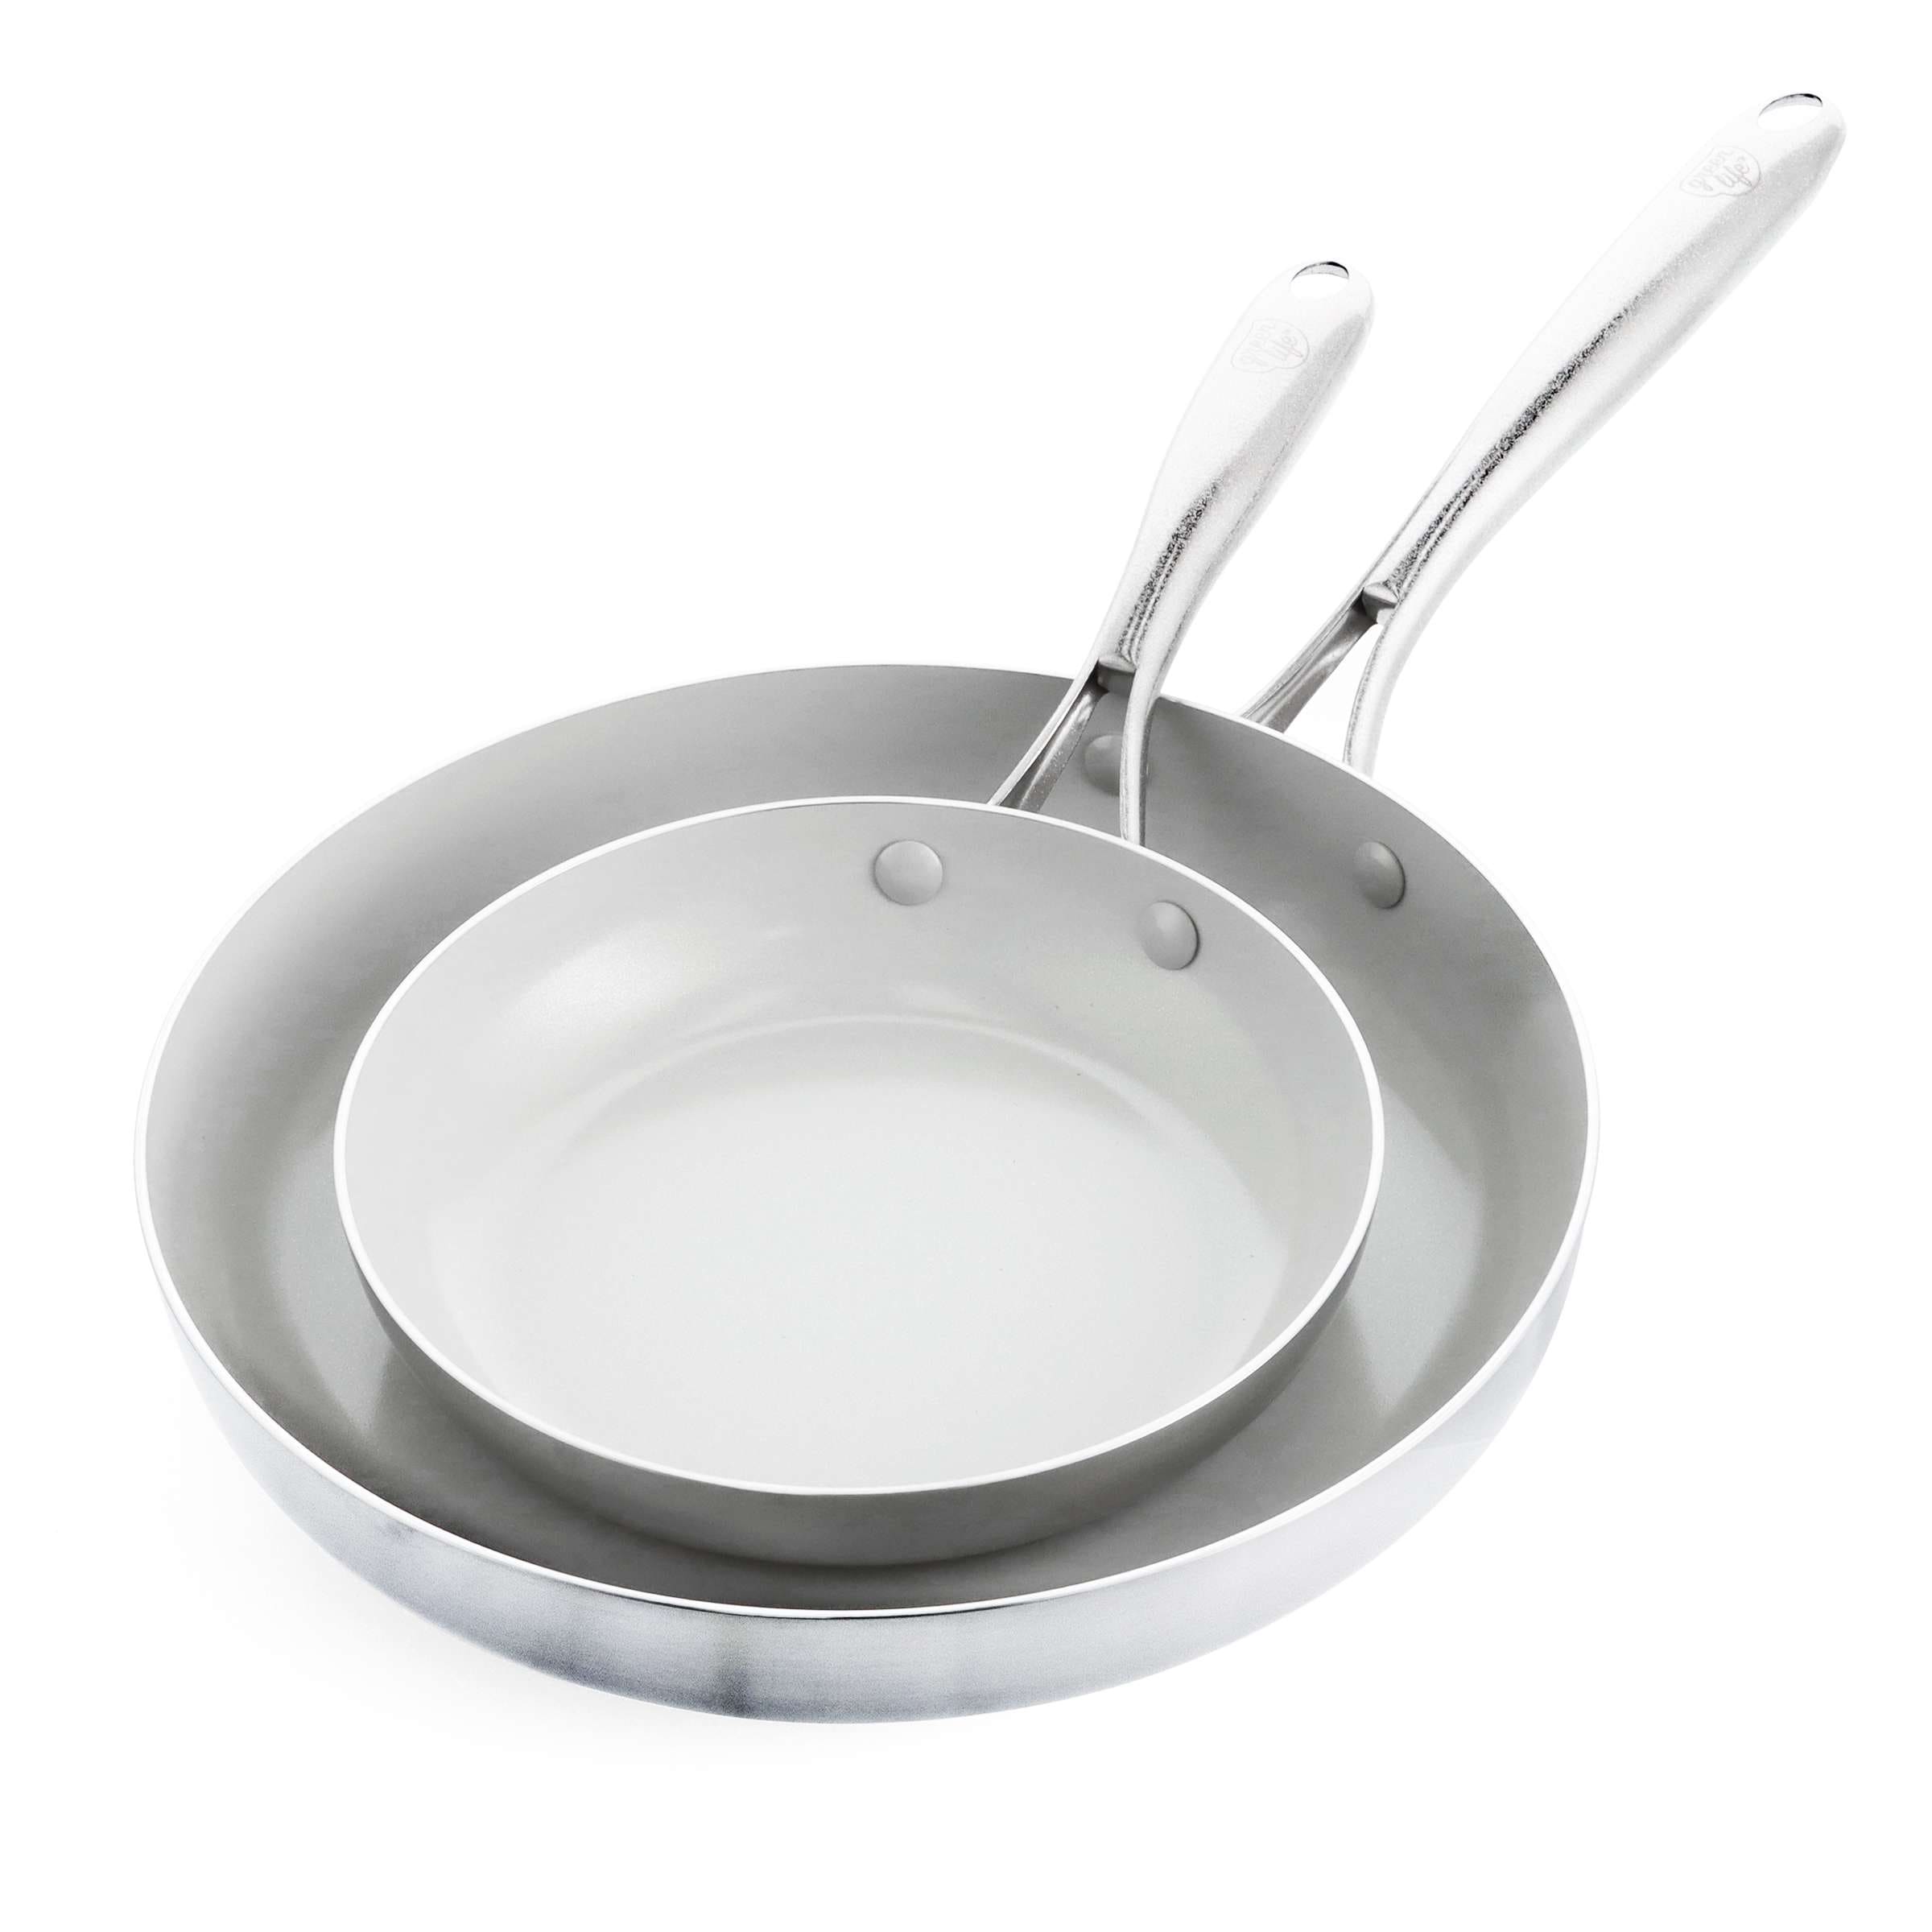 https://ak1.ostkcdn.com/images/products/is/images/direct/e18d891dac8264195eb76ce6f5b41c8b7849b096/GreenLife-Stainless-Steel-Pro-Frypan-Set-8%22-%26-11%22.jpg